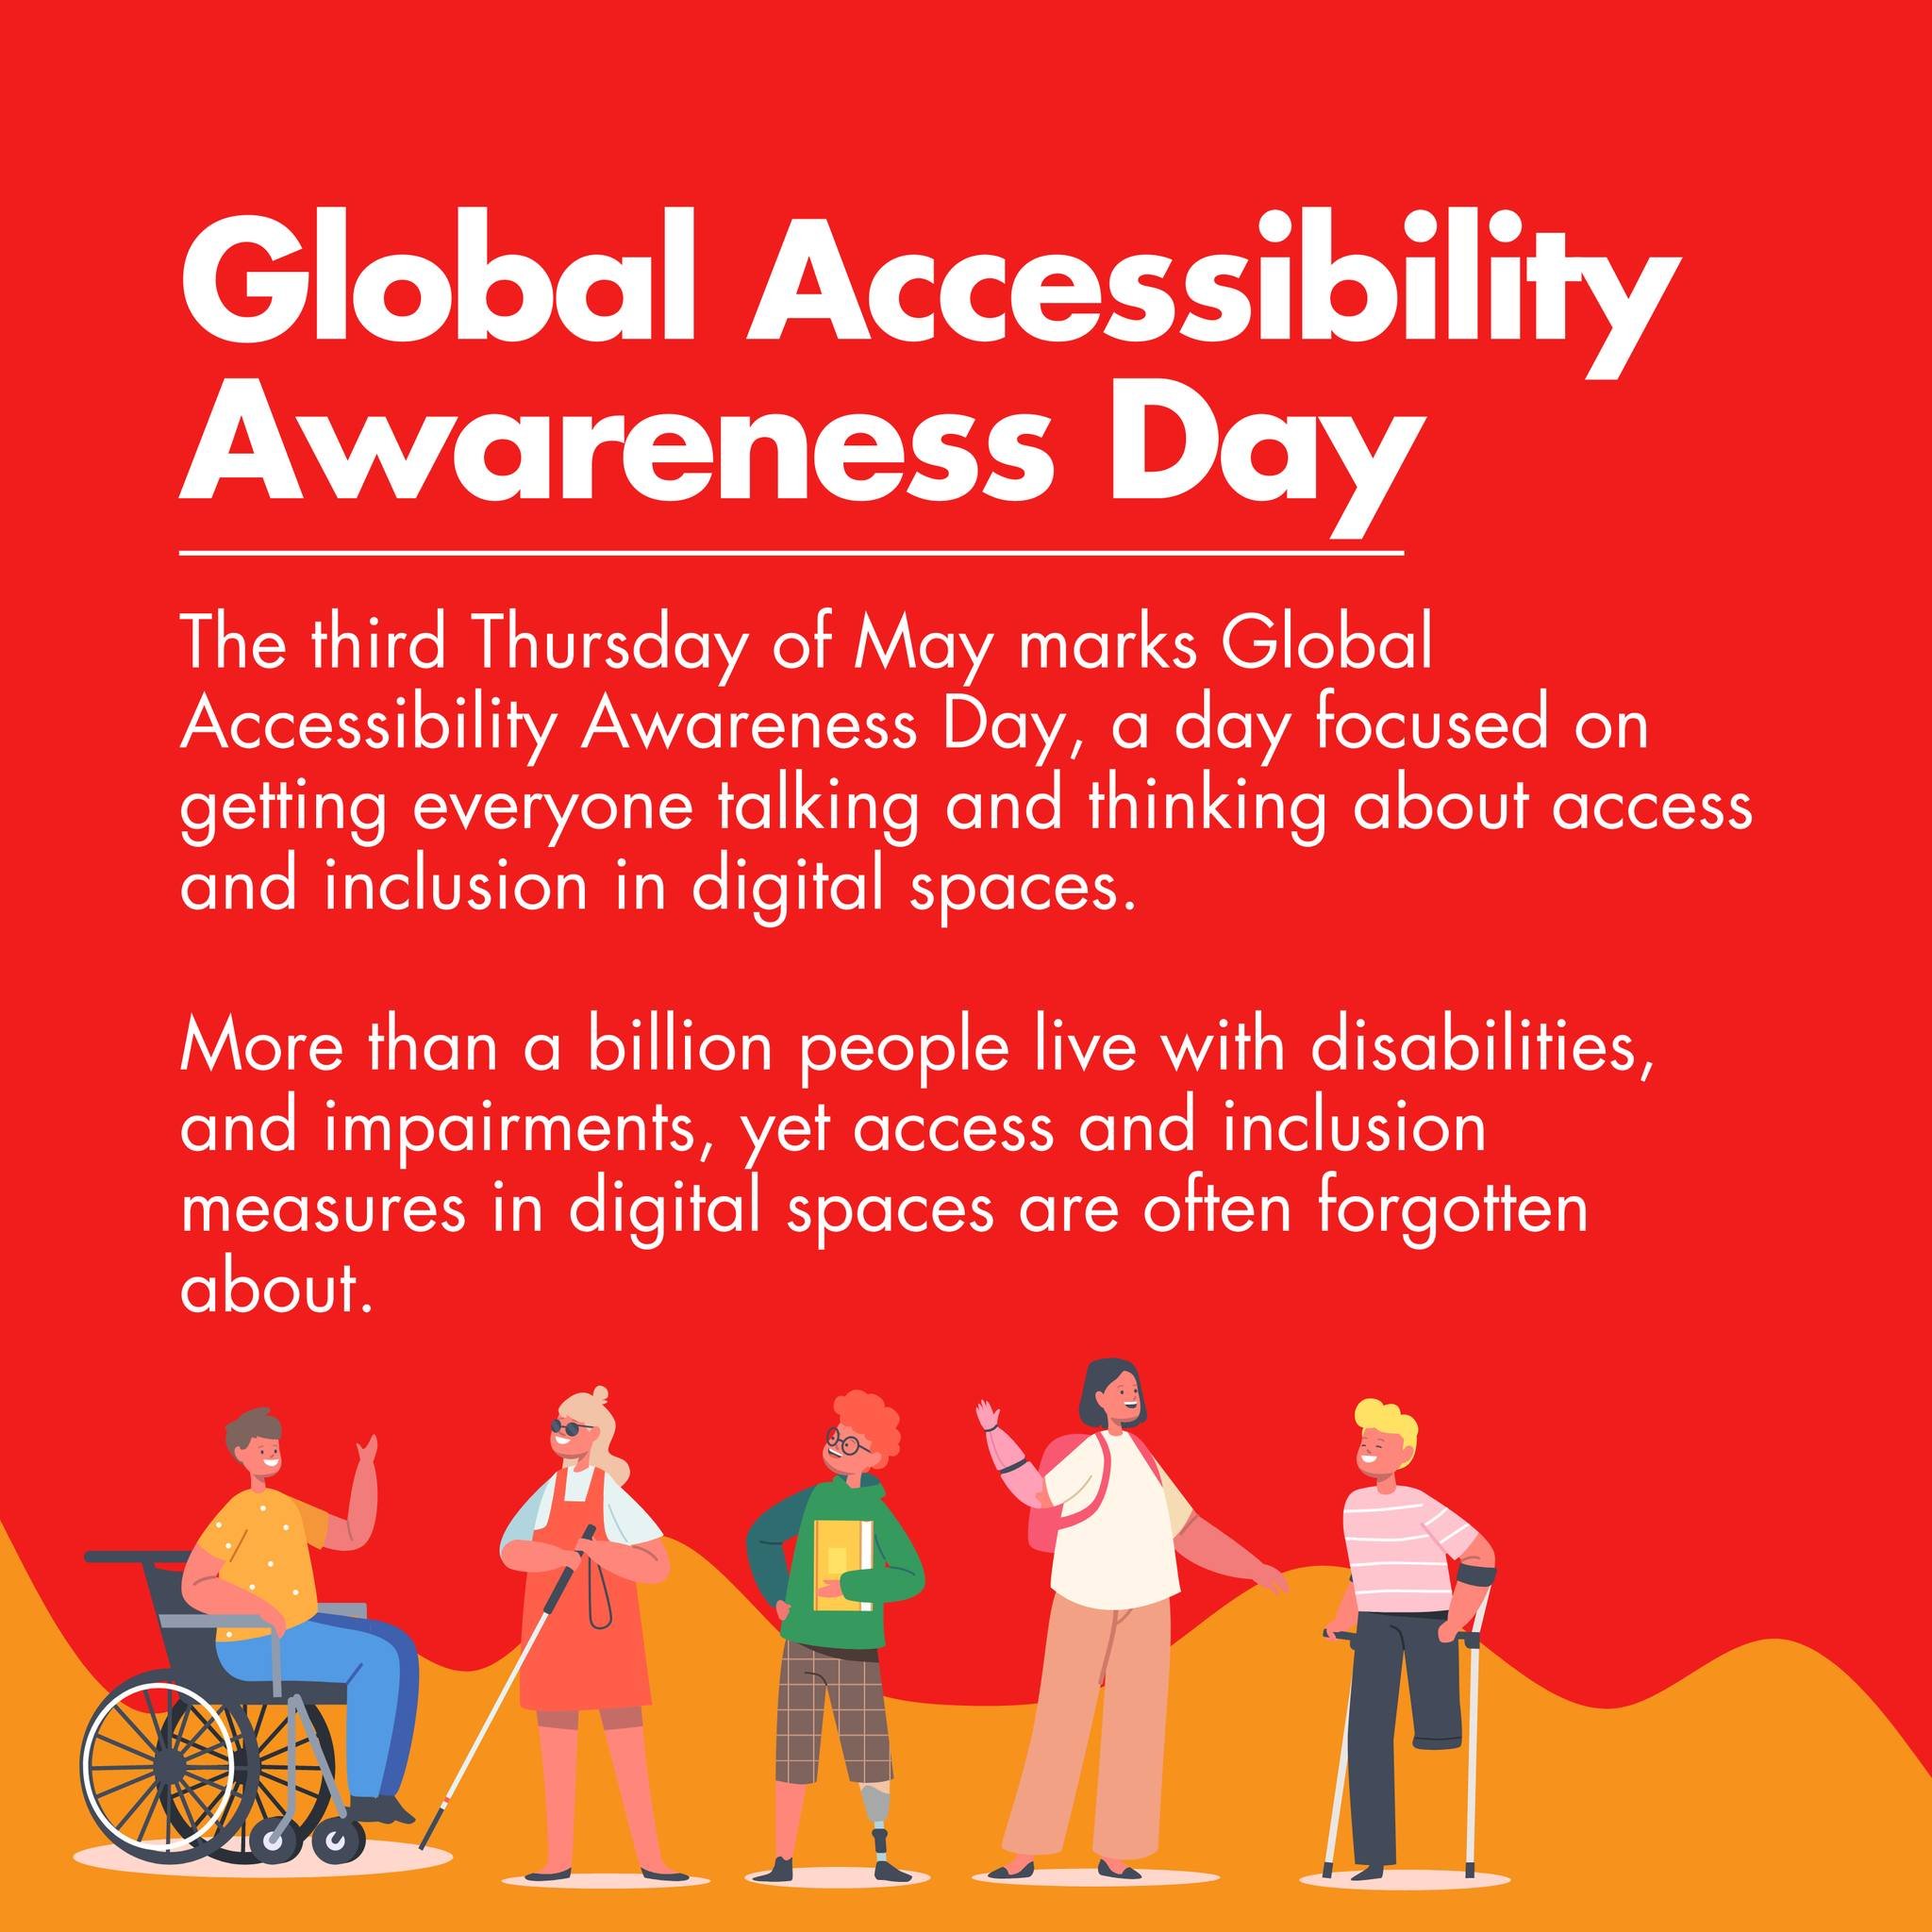 Did you know today marks Global Accessibility Awareness Day?
Swipe through to find out more!

[ID: three slides with red backgrounds and white text overlaid. Slide 1 has an orange wavey bar down the bottom and an illustration of 5 people with varied 